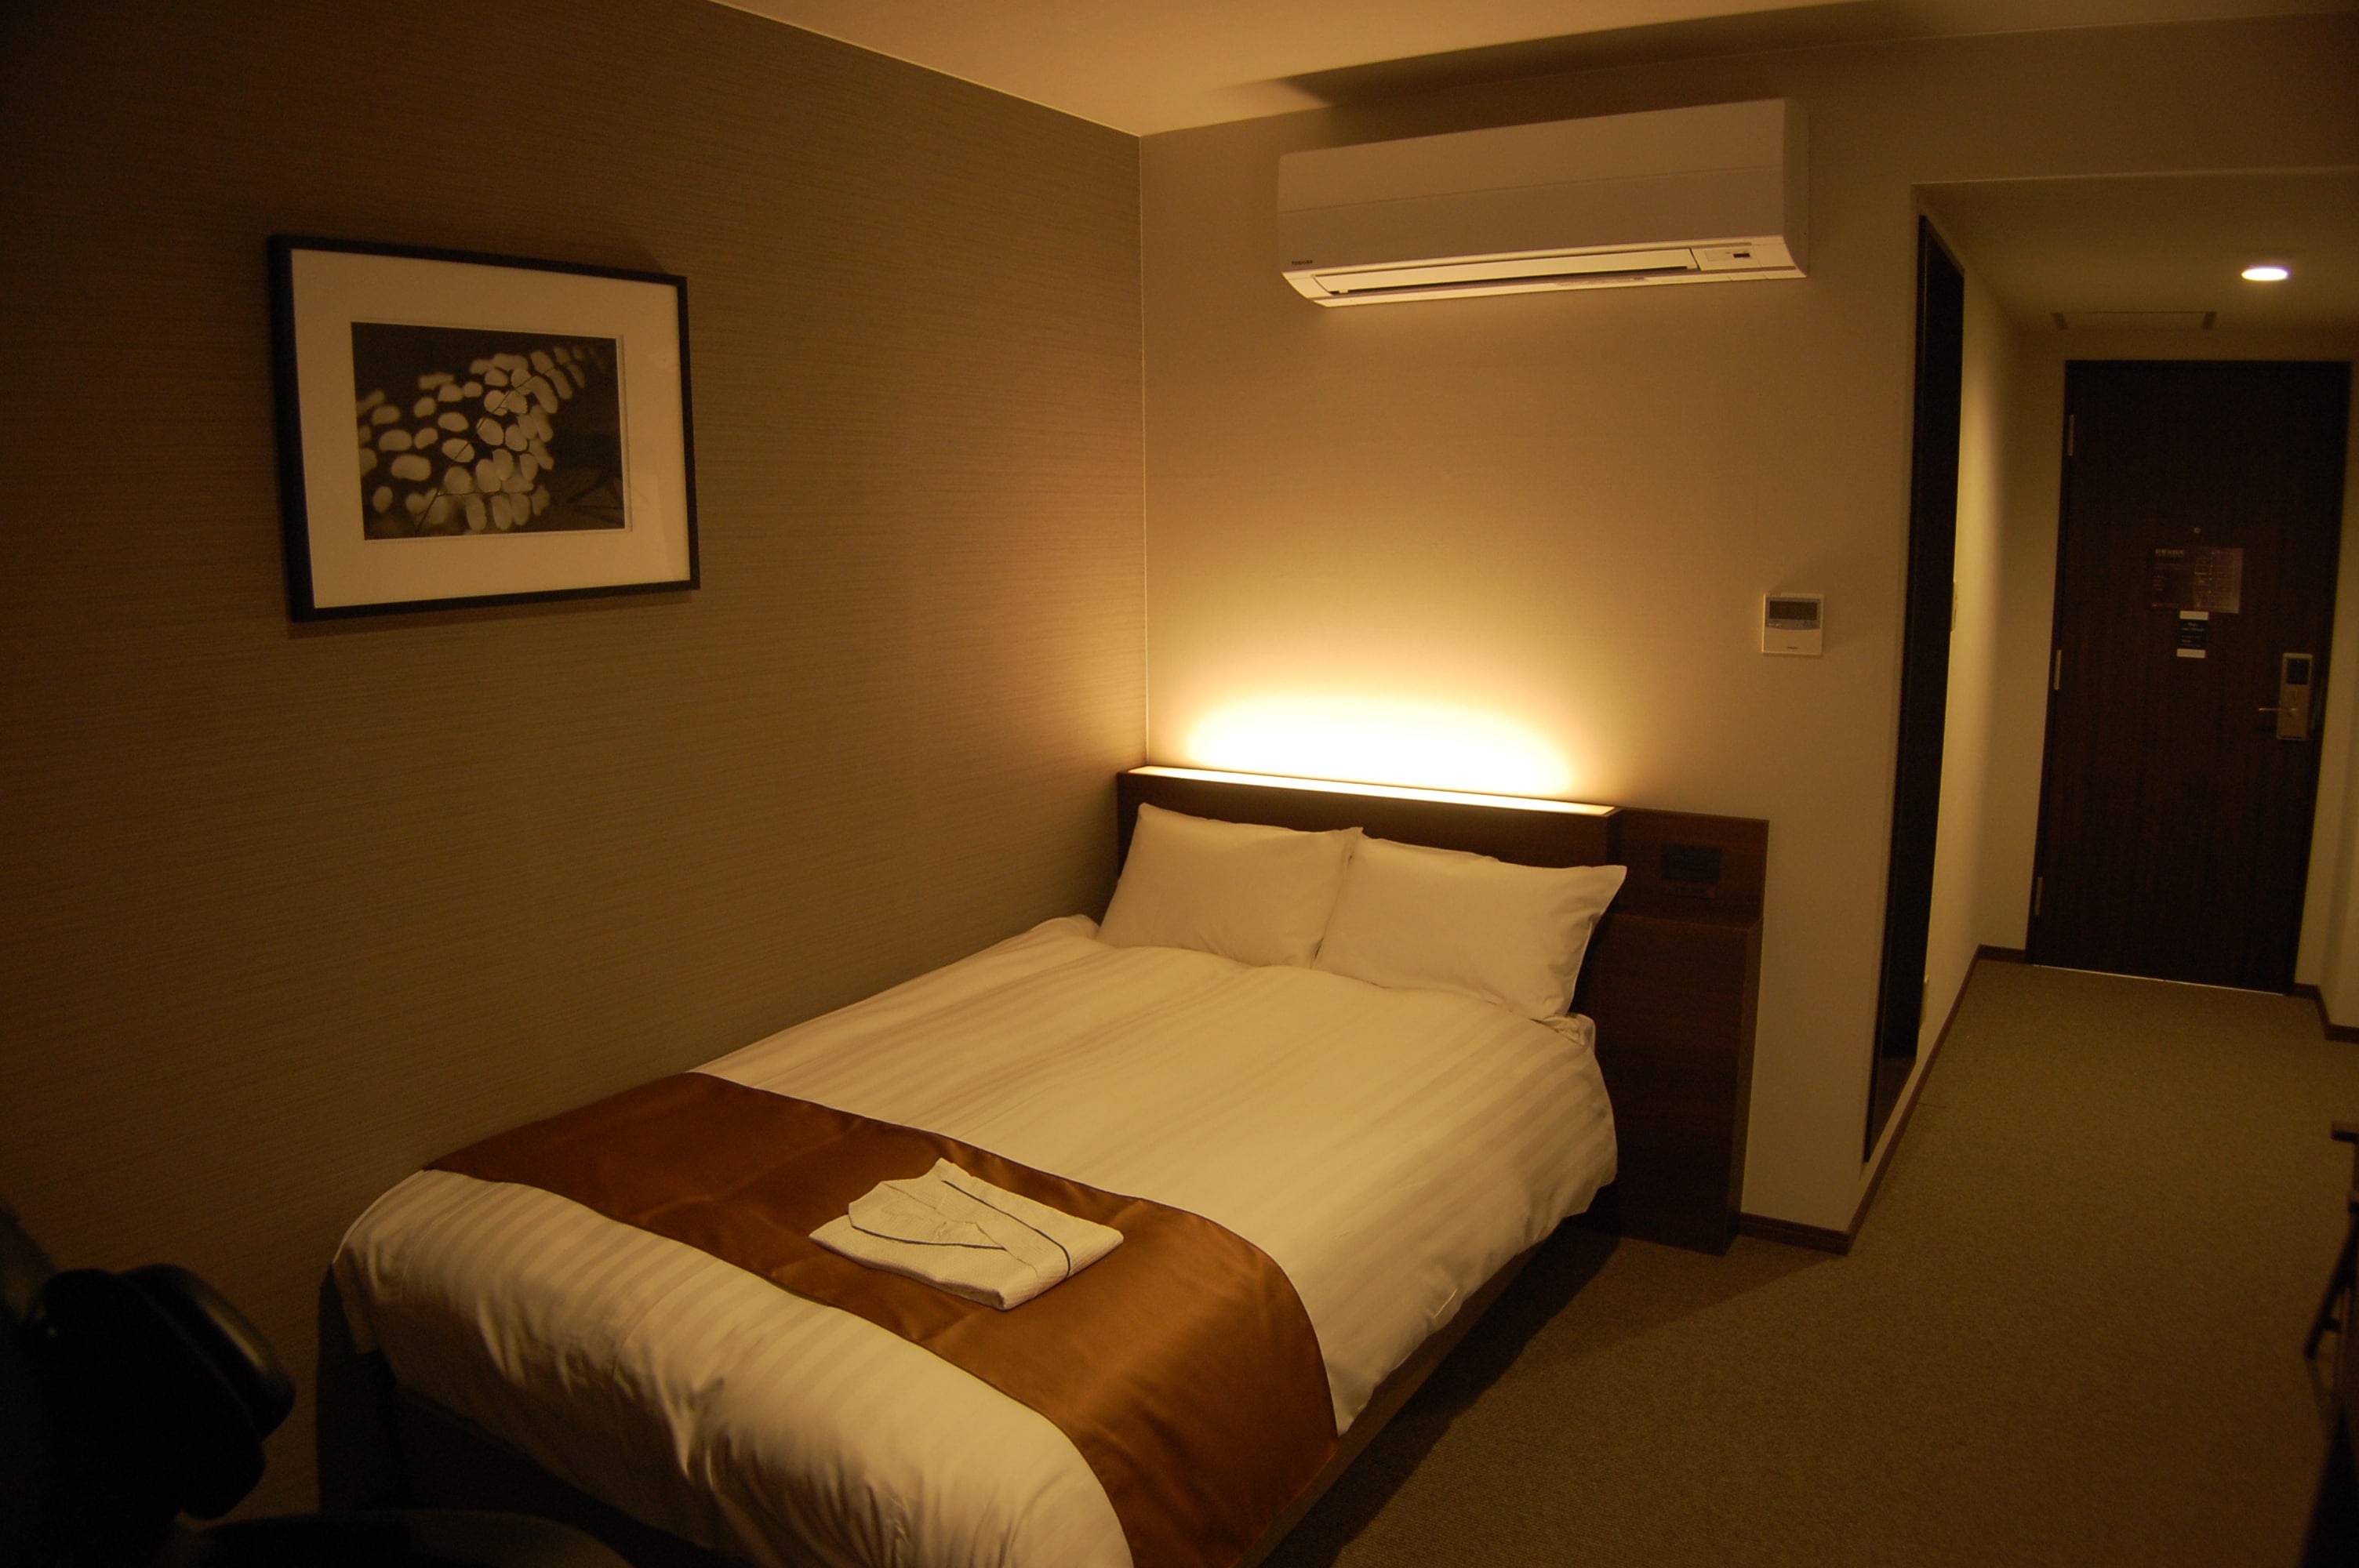 Single room with a spacious size of 20㎡, semi-double Simmons bed